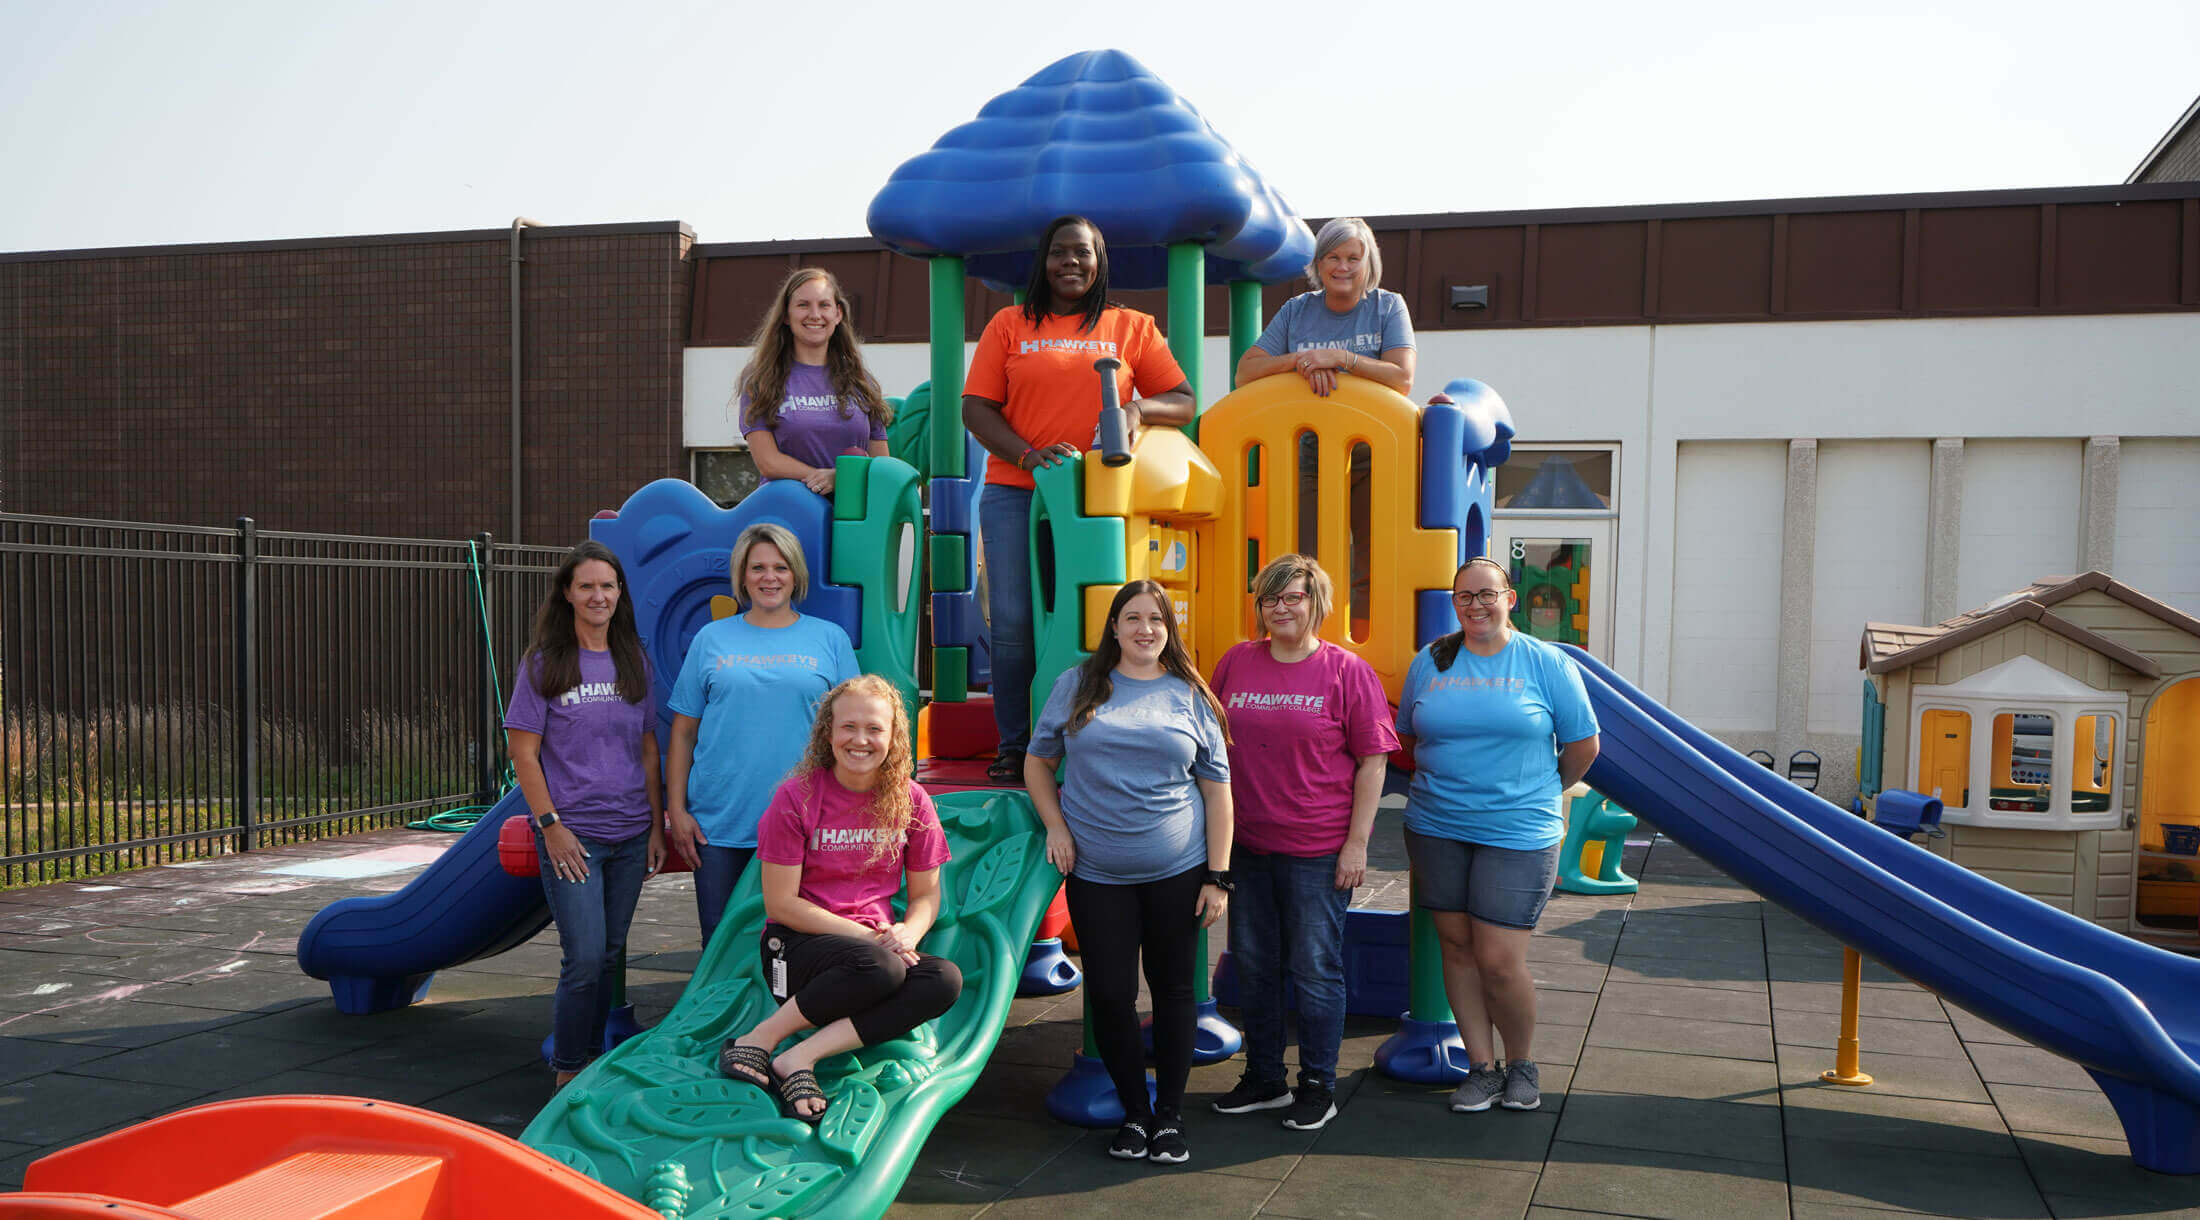 The staff of Hawkeye Community College Foundation Child Care poses for a photo on the playground equipment